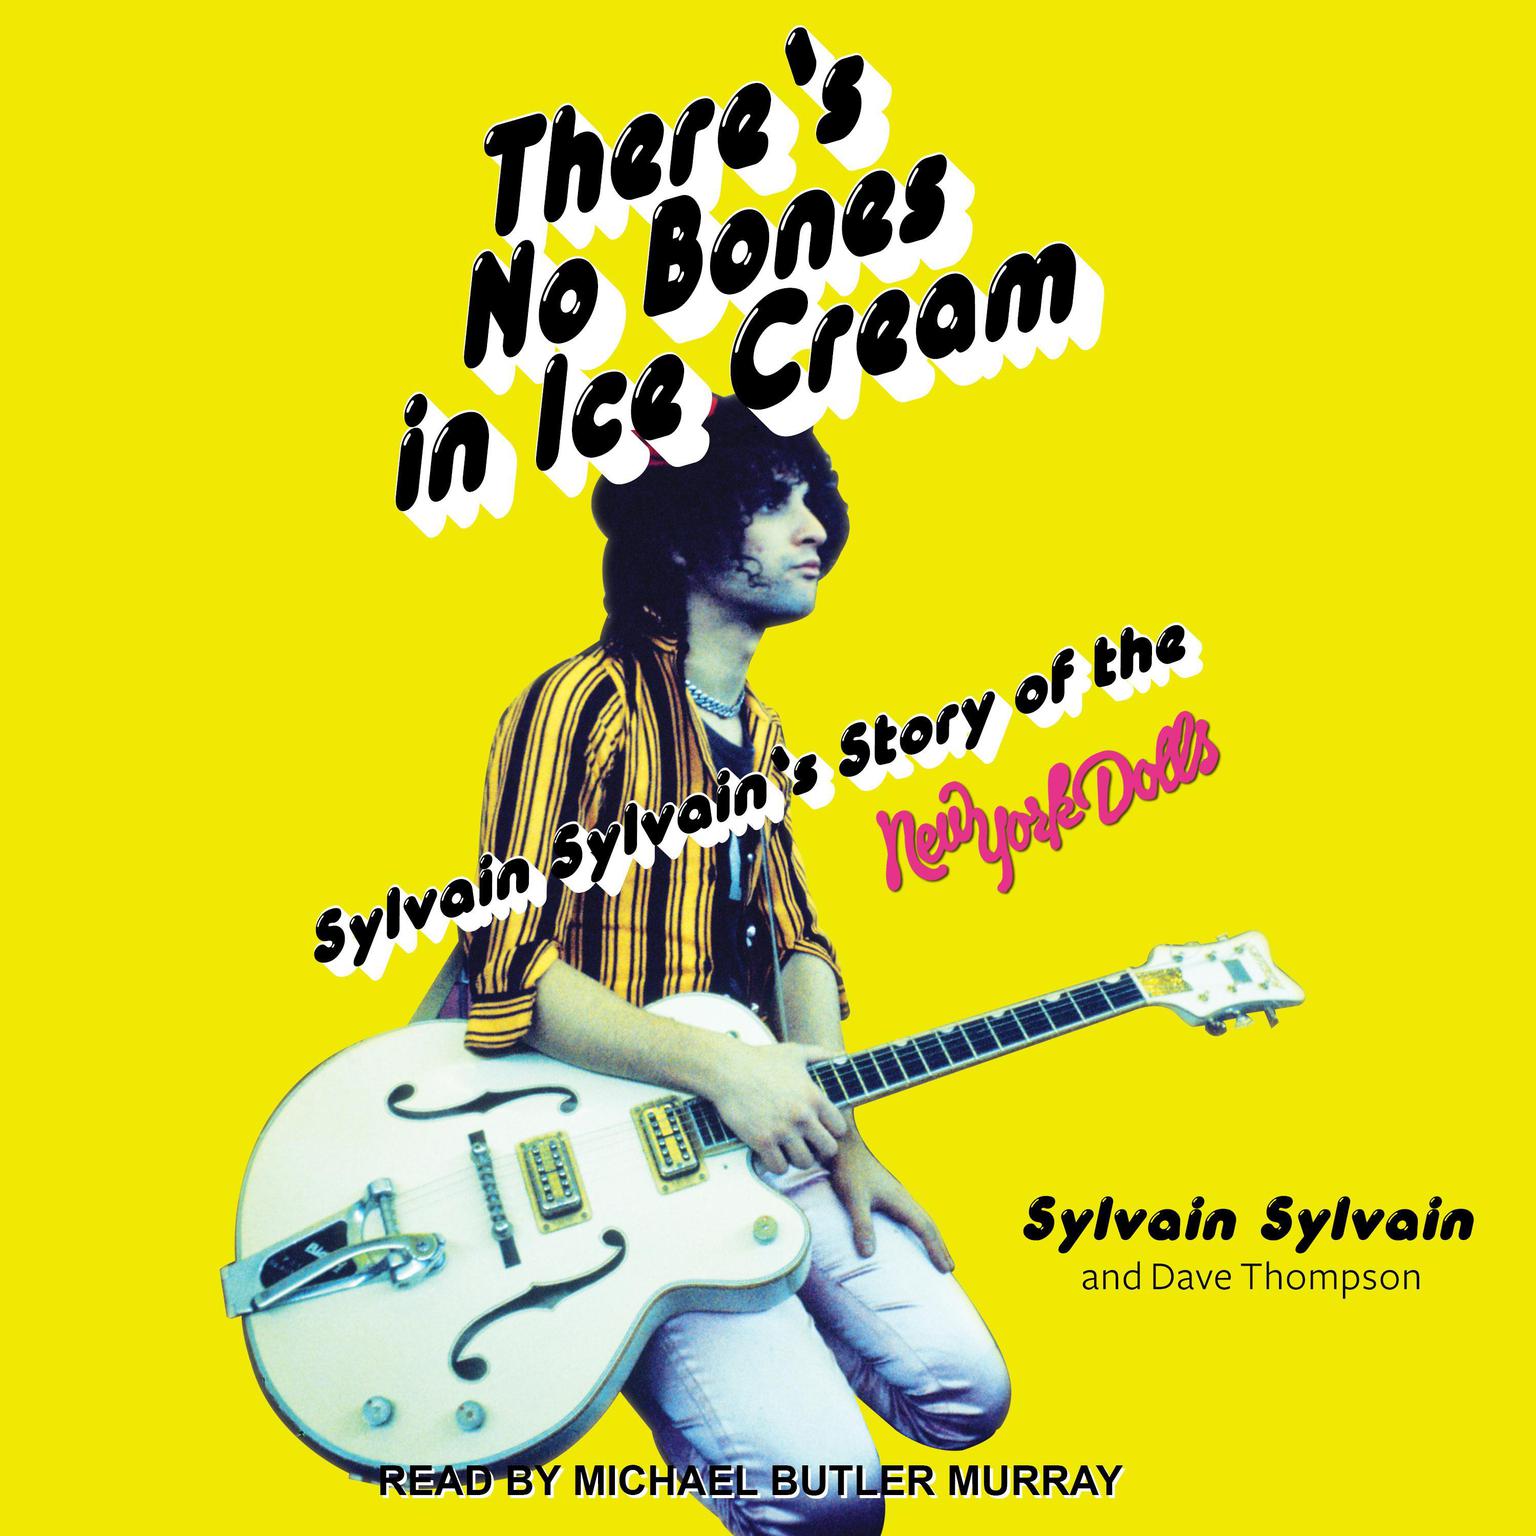 Theres No Bones in Ice Cream: Sylvain Sylvains Story of the New York Dolls Audiobook, by Dave Thompson